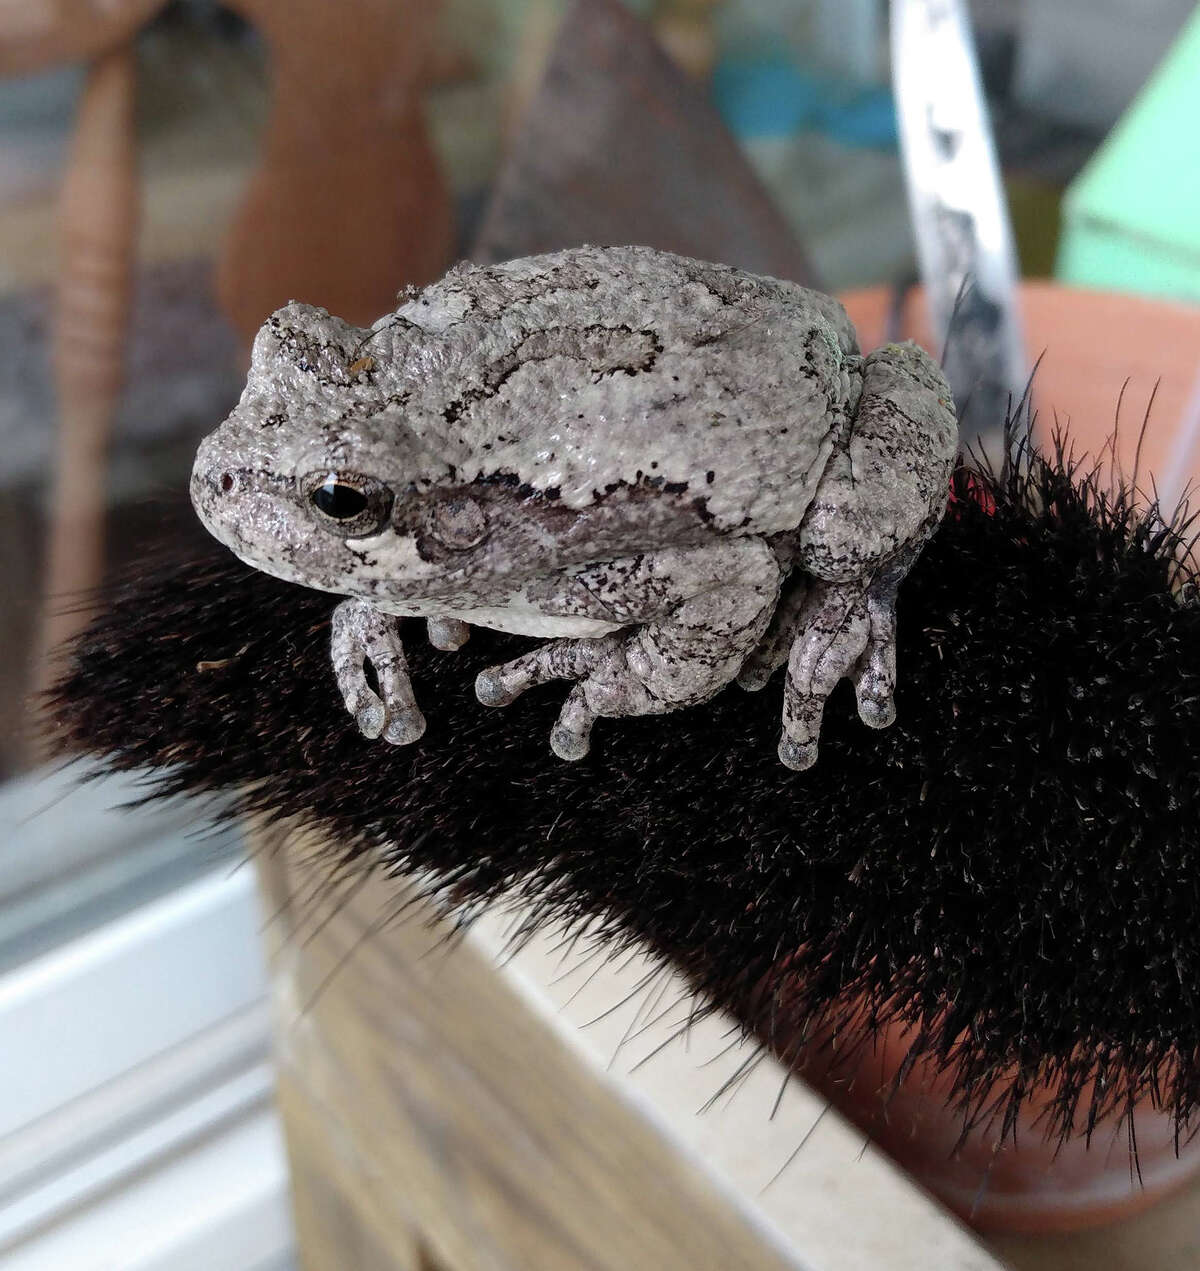 A frog rests on a brush on a potting bench in Greenfield.